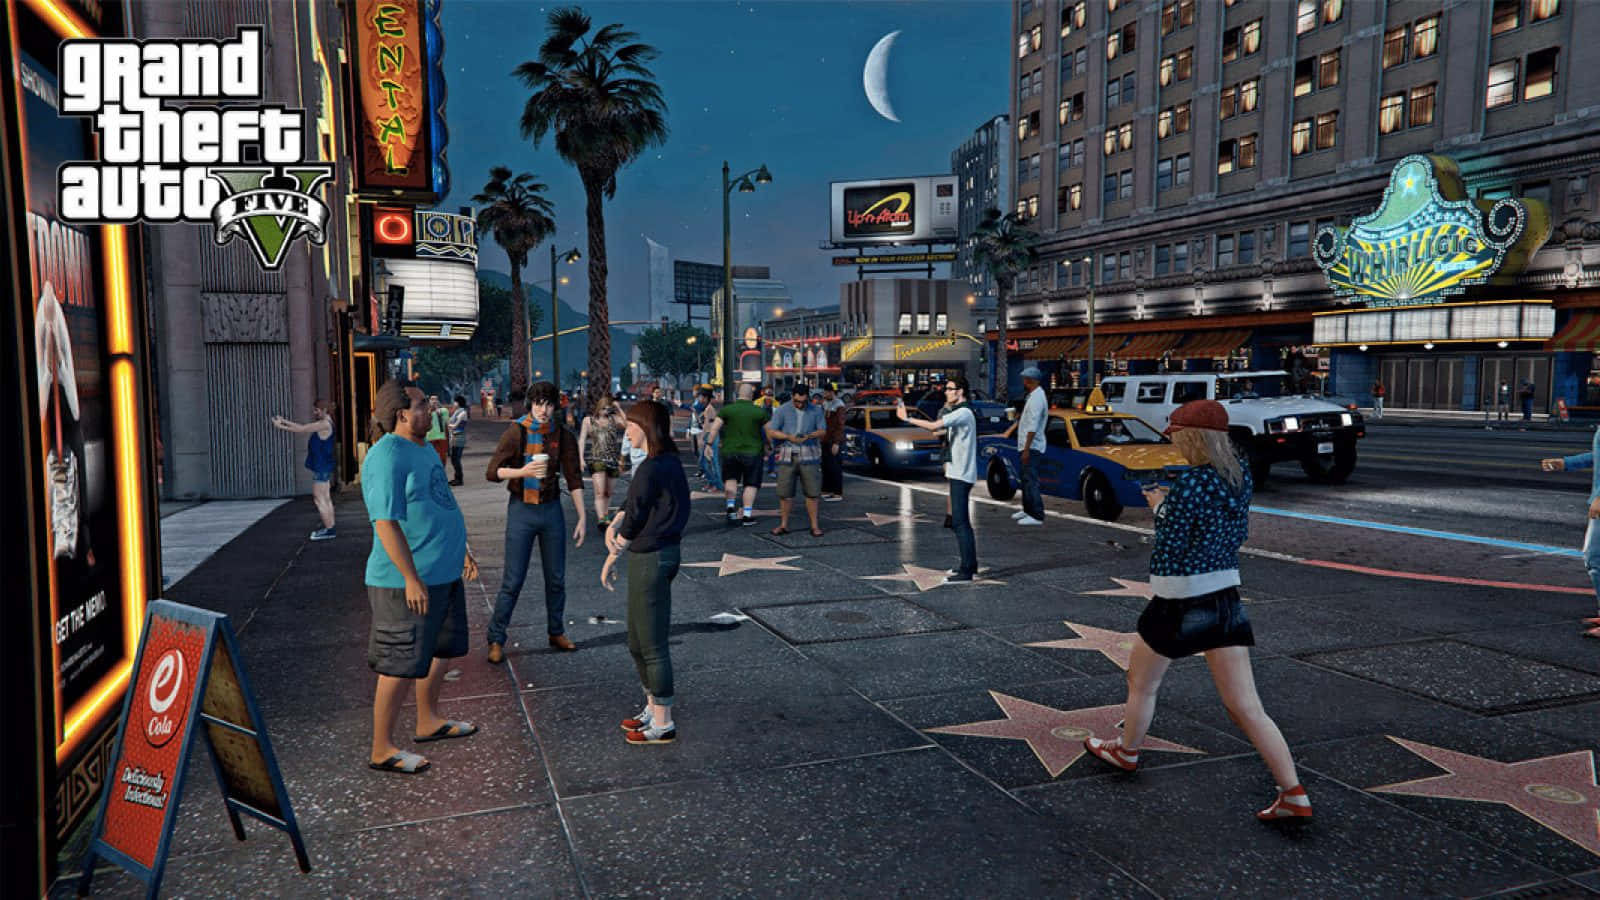 Get Ready for an Epic Adventure in Grand Theft Auto V